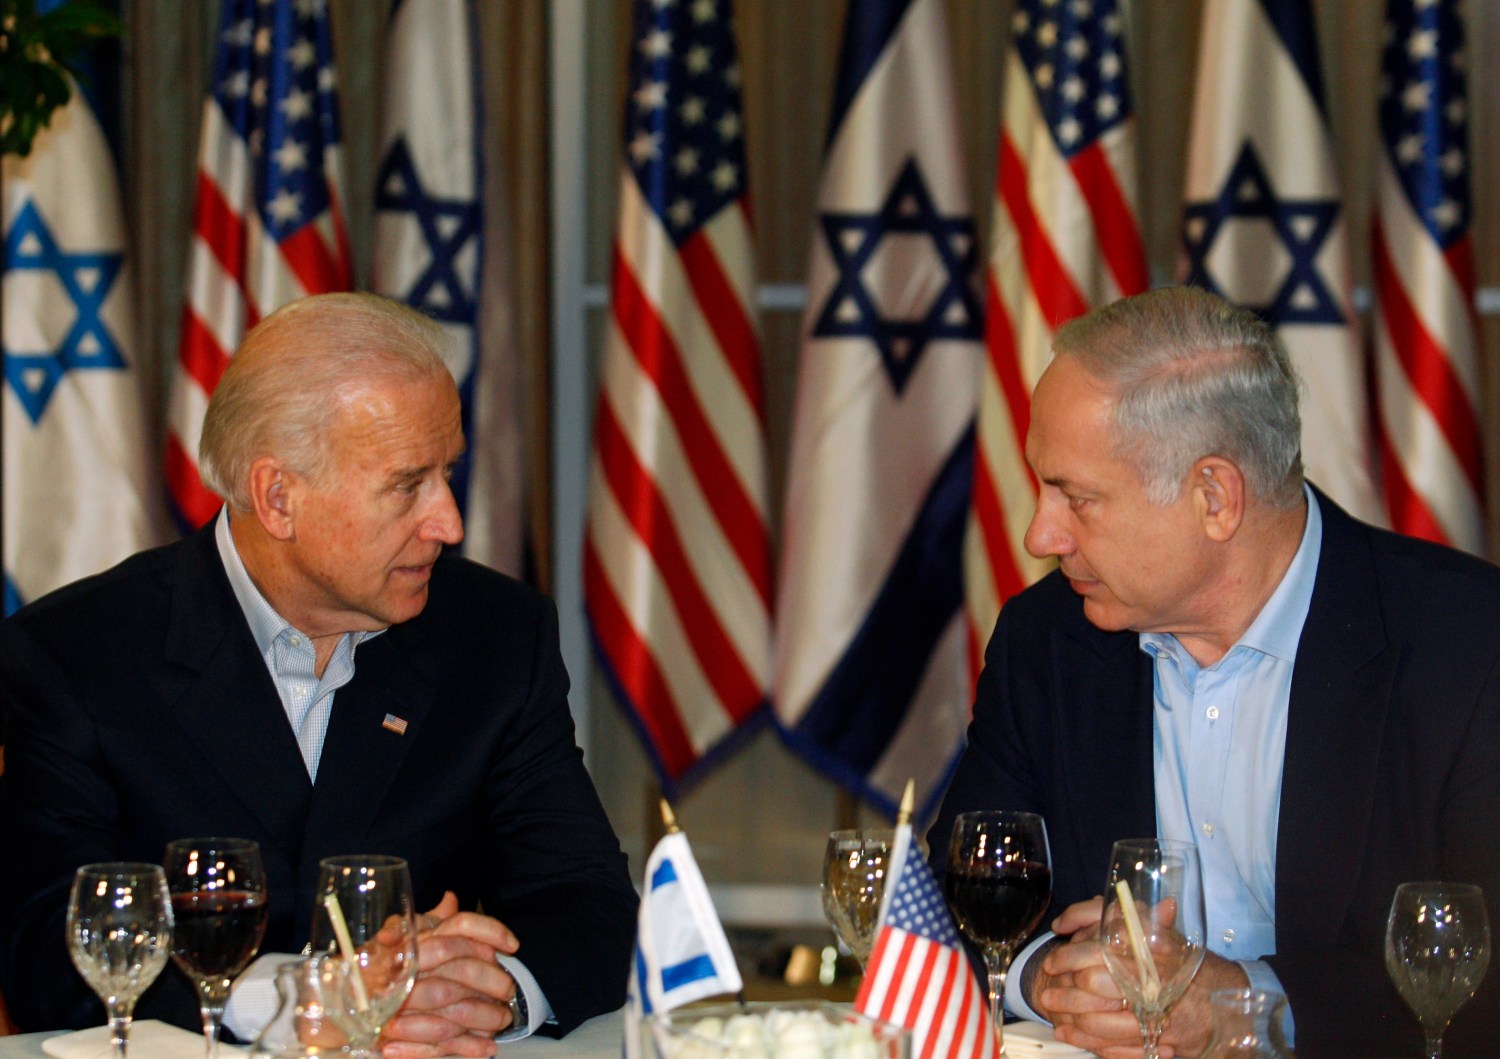 U.S. Vice President Joe Biden sits with Israel's Prime Minister Benjamin Netanyahu (R) before a dinner at the Prime Minister's residence in Jerusalem March 9, 2010. Biden assured Israel on Tuesday of Washington's commitment to its security and preventing Iran from producing nuclear weapons. REUTERS/Baz Ratner (JERUSALEM - Tags: POLITICS)